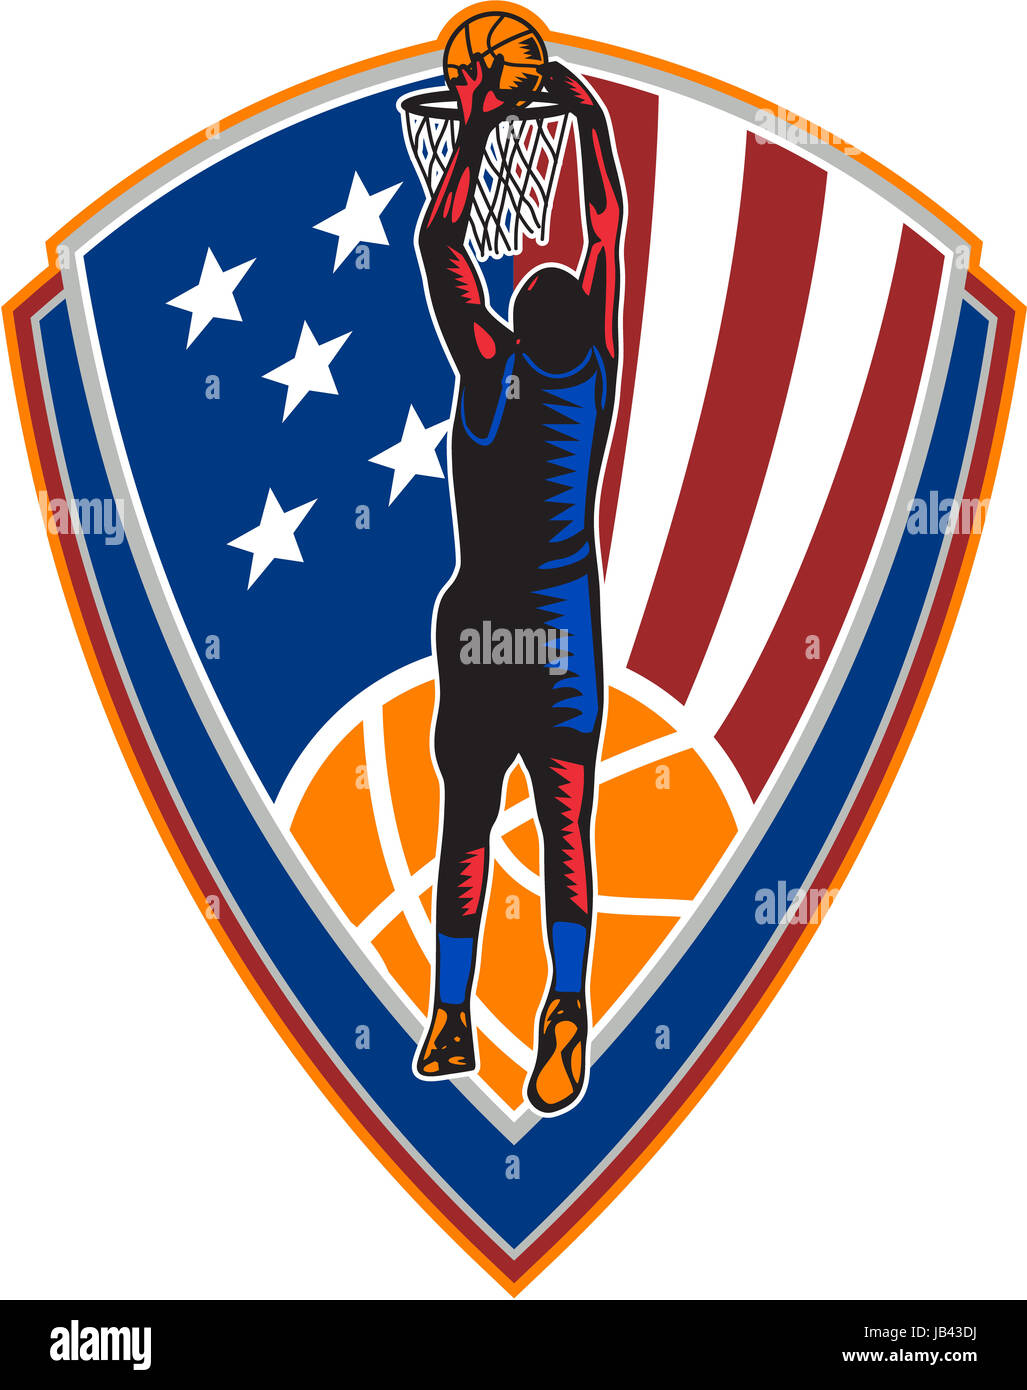 Illustration of a basketball player dunking rebounding ball set inside American stars and stripes flag shield crest done in retro style on isolated background. Stock Photo